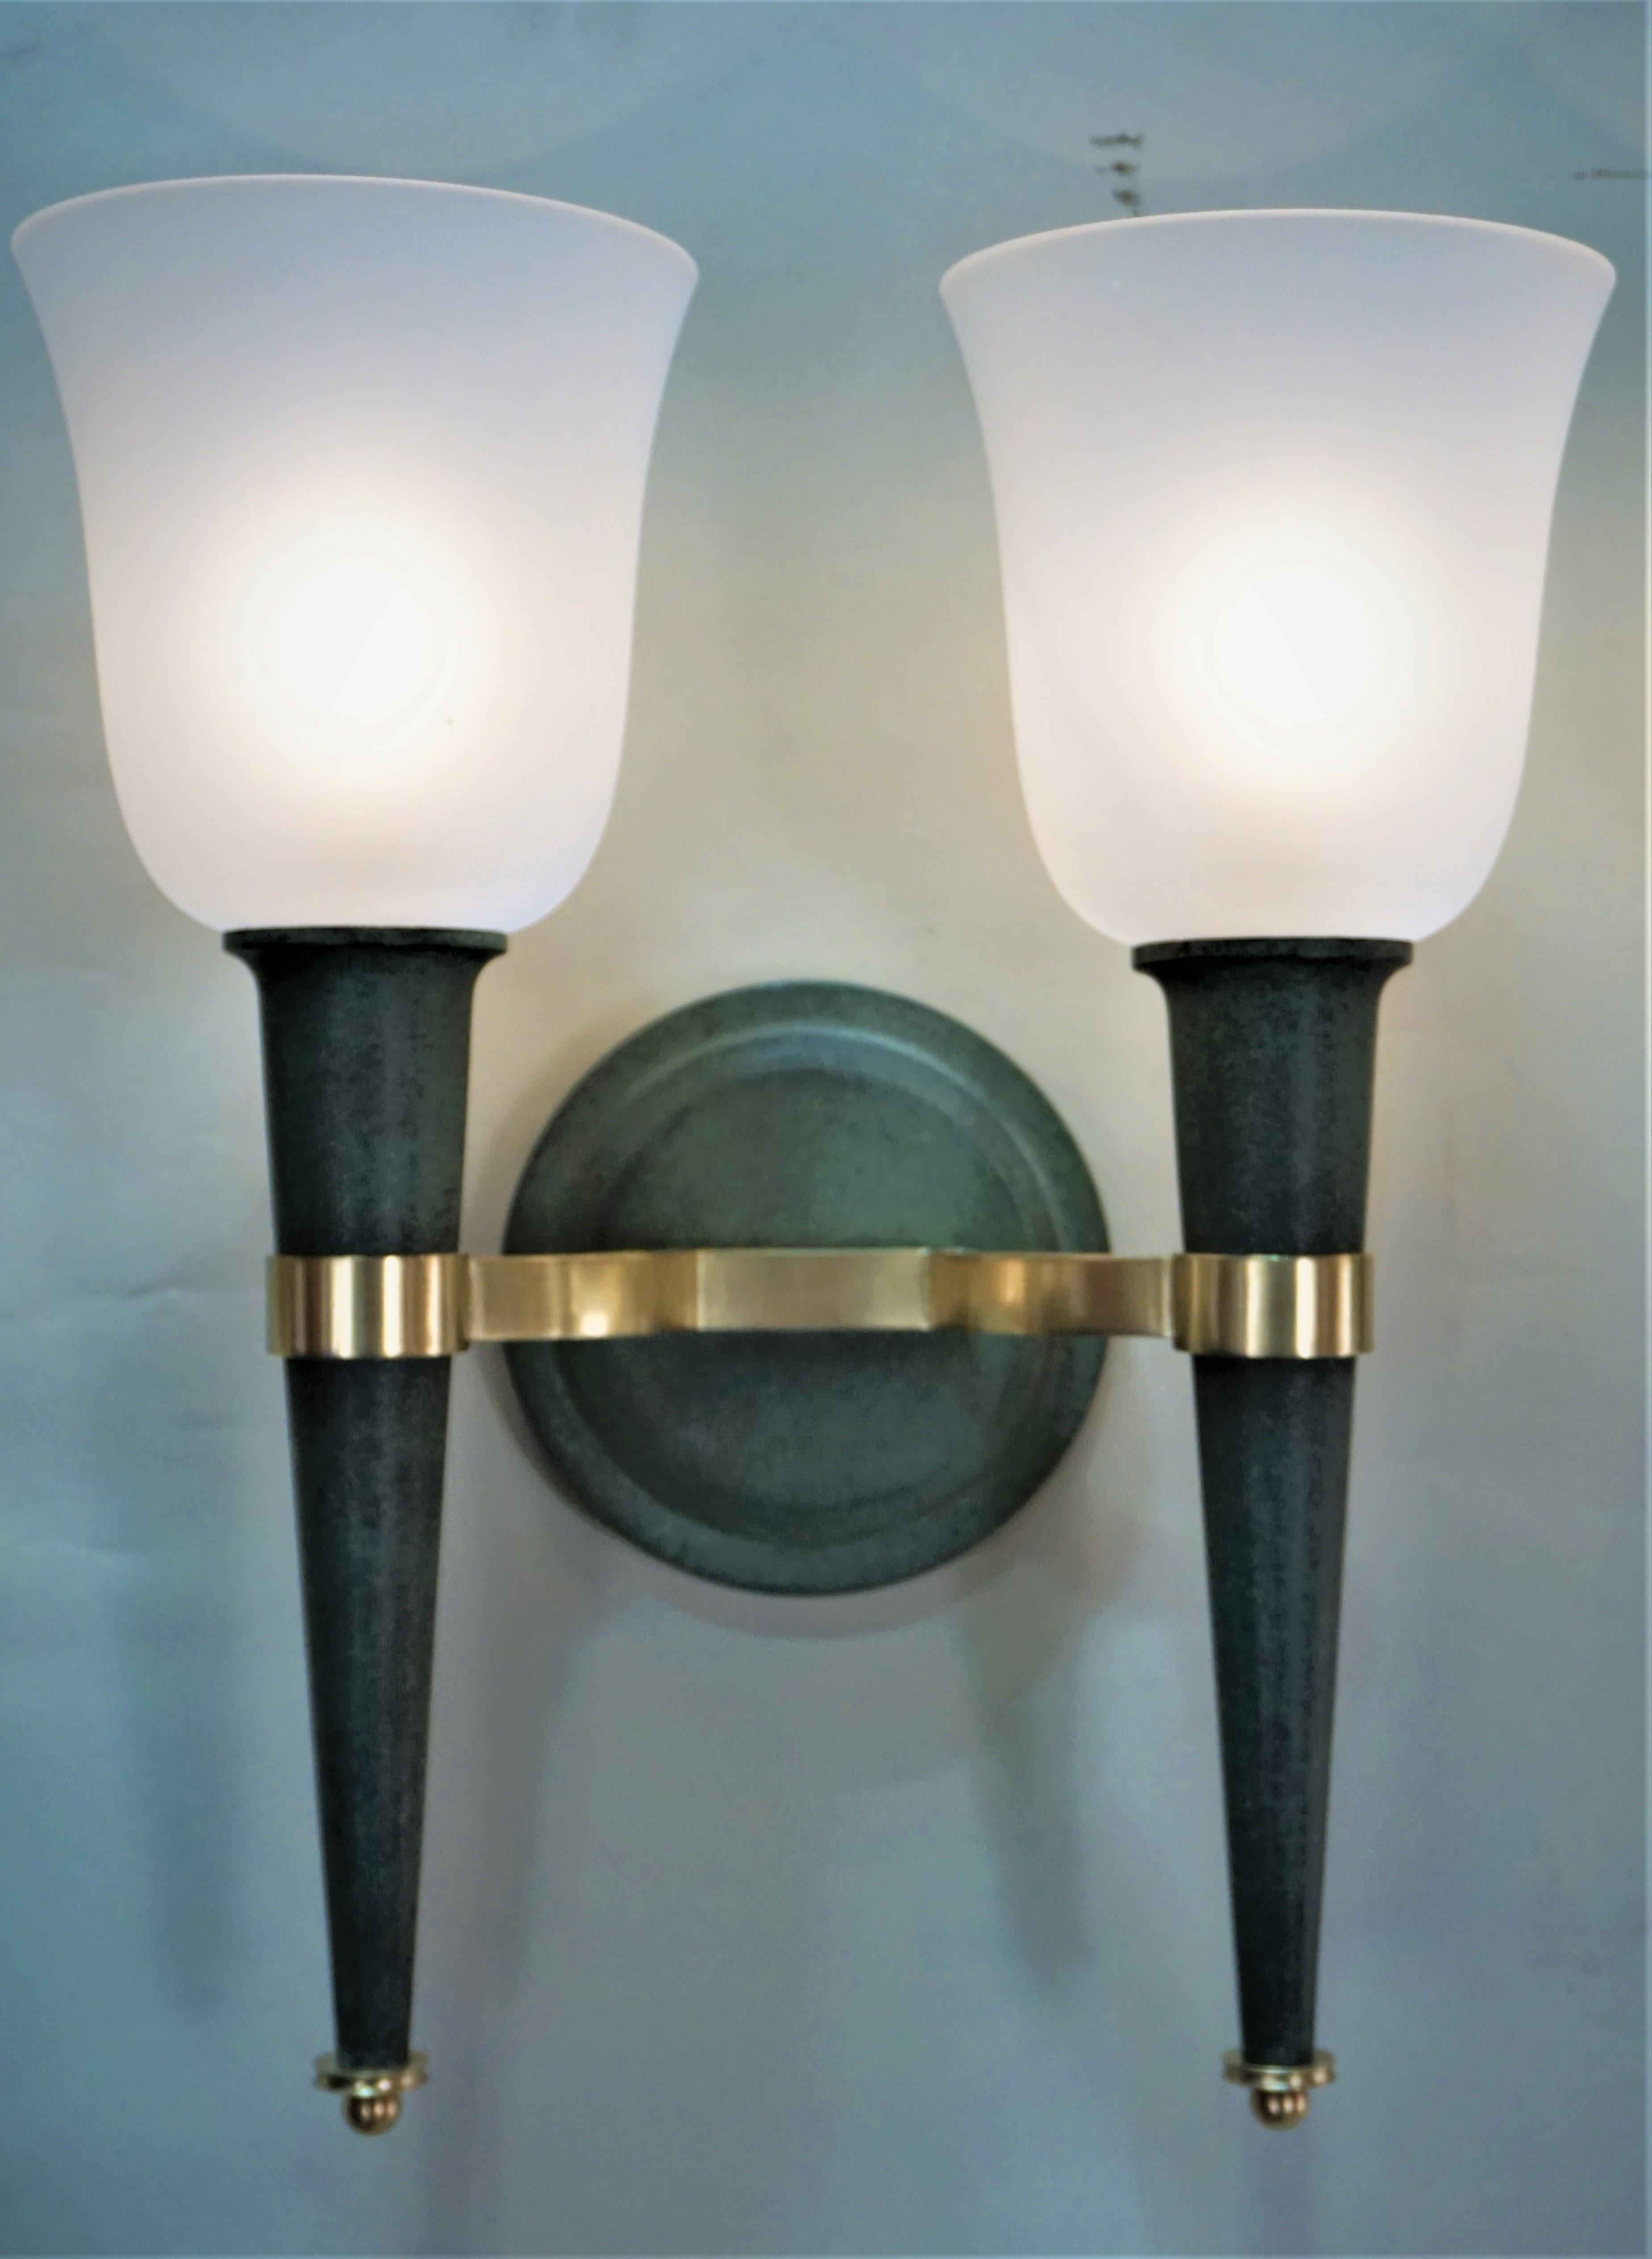 Combination of verdi green/black patina with satin finish bronze double arm torchere wall sconces.